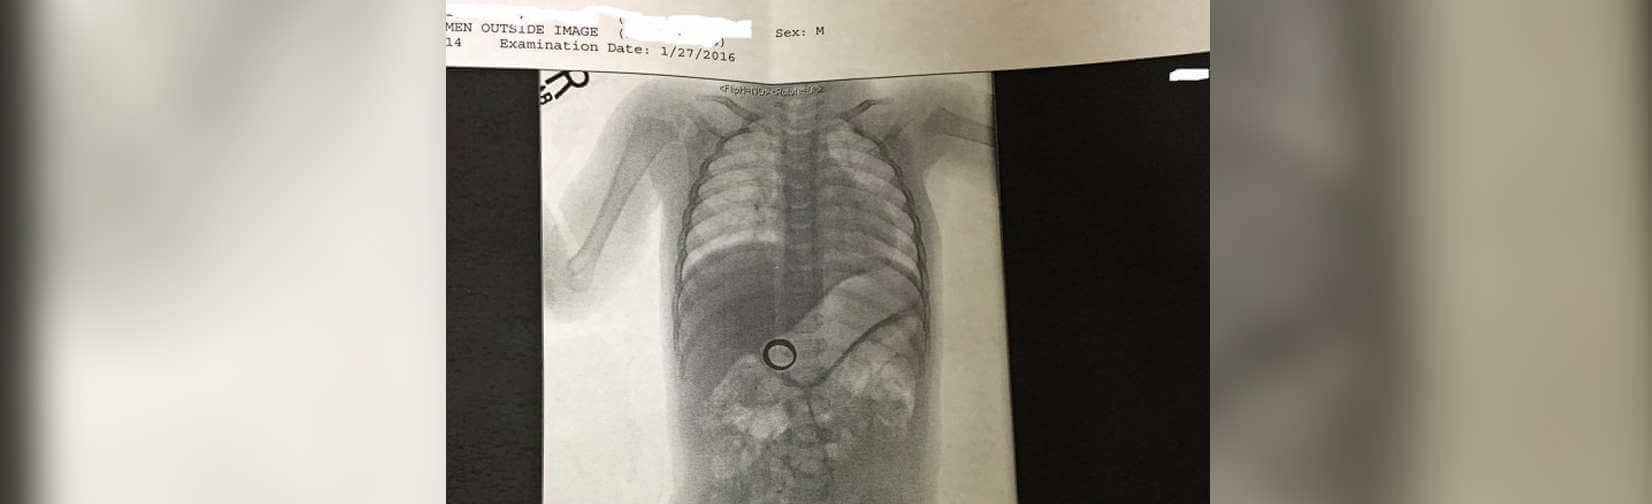 Baby�s X-ray solves mystery of mom�s missing wedding ring